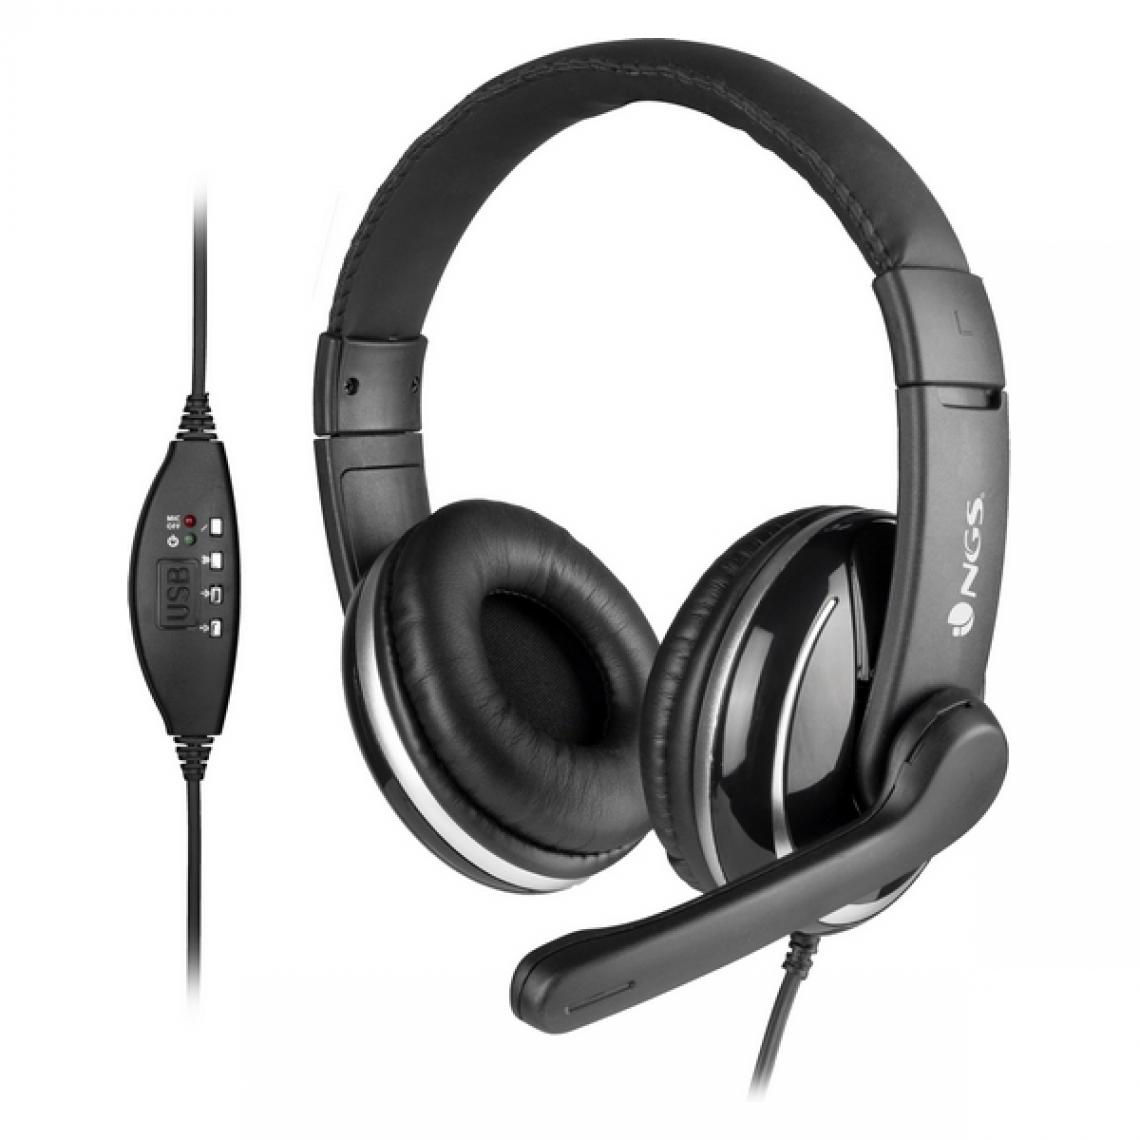 Ngs - Casques avec Microphone NGS VOX800USB Noir - Micro-Casque